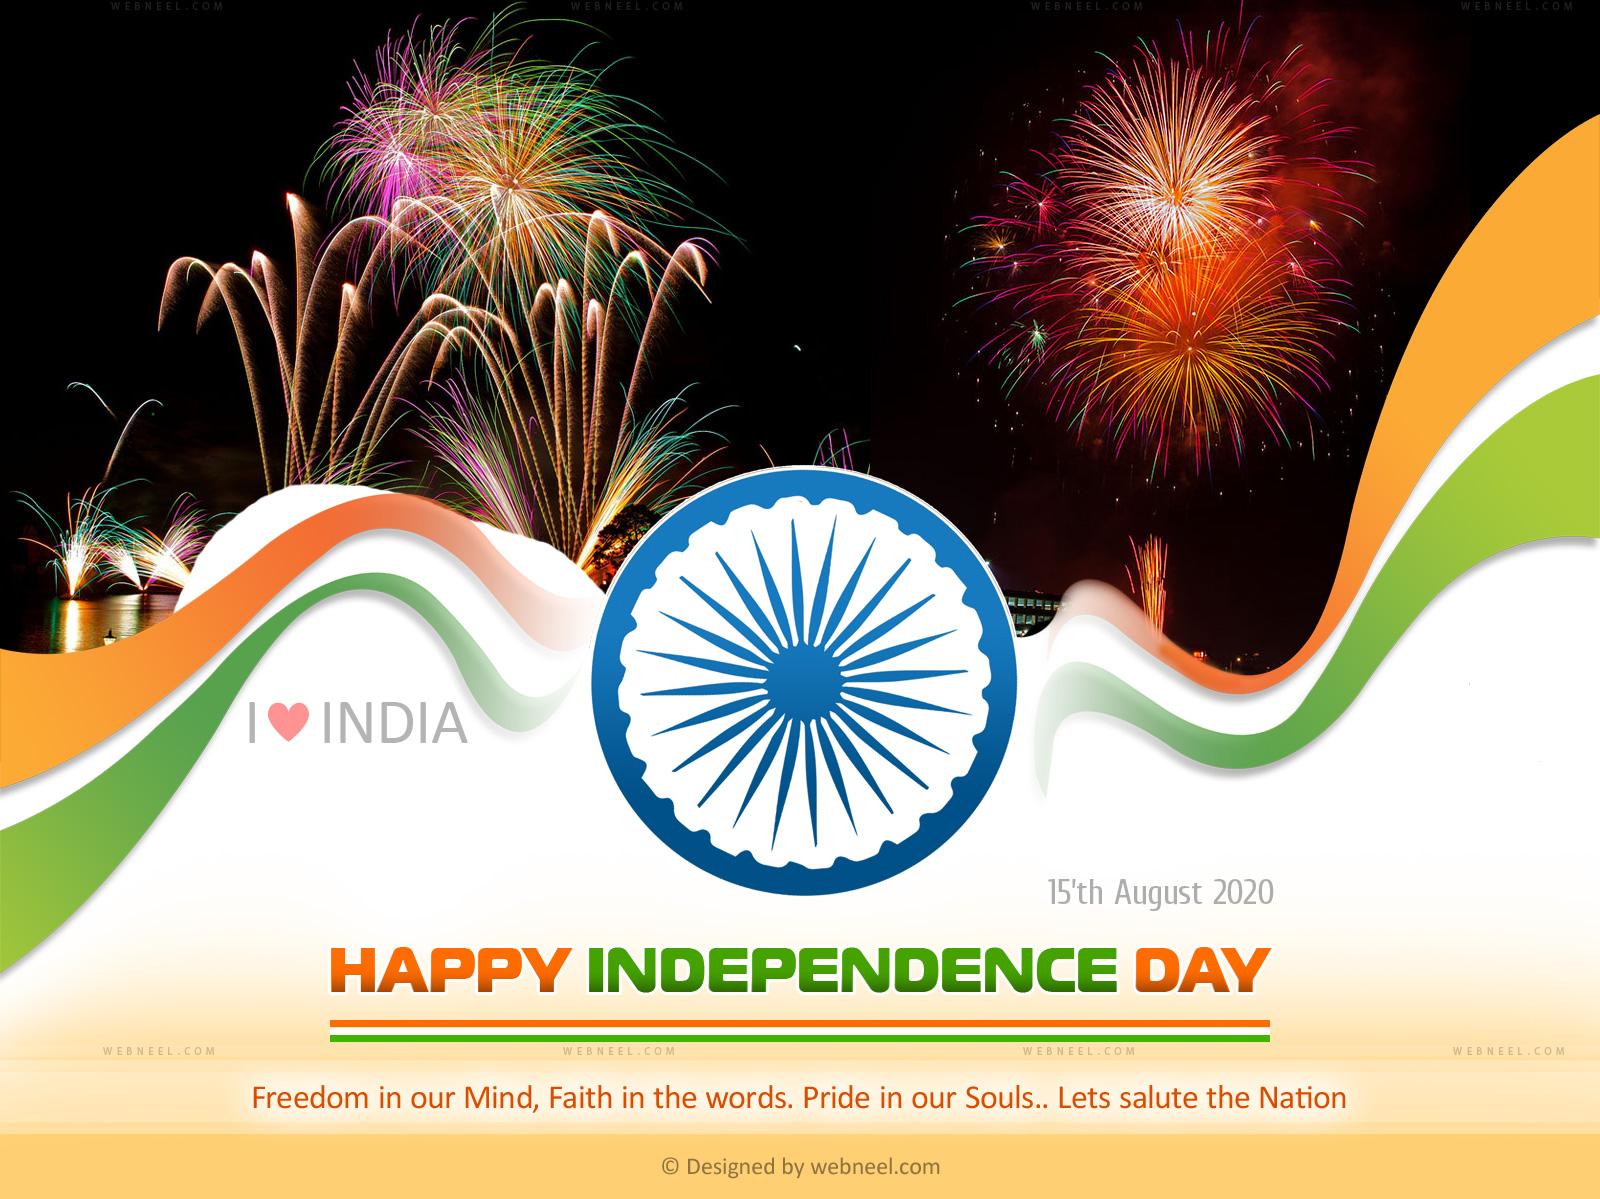  Beautiful Indian Independence Day Wallpapers and Greeting cards